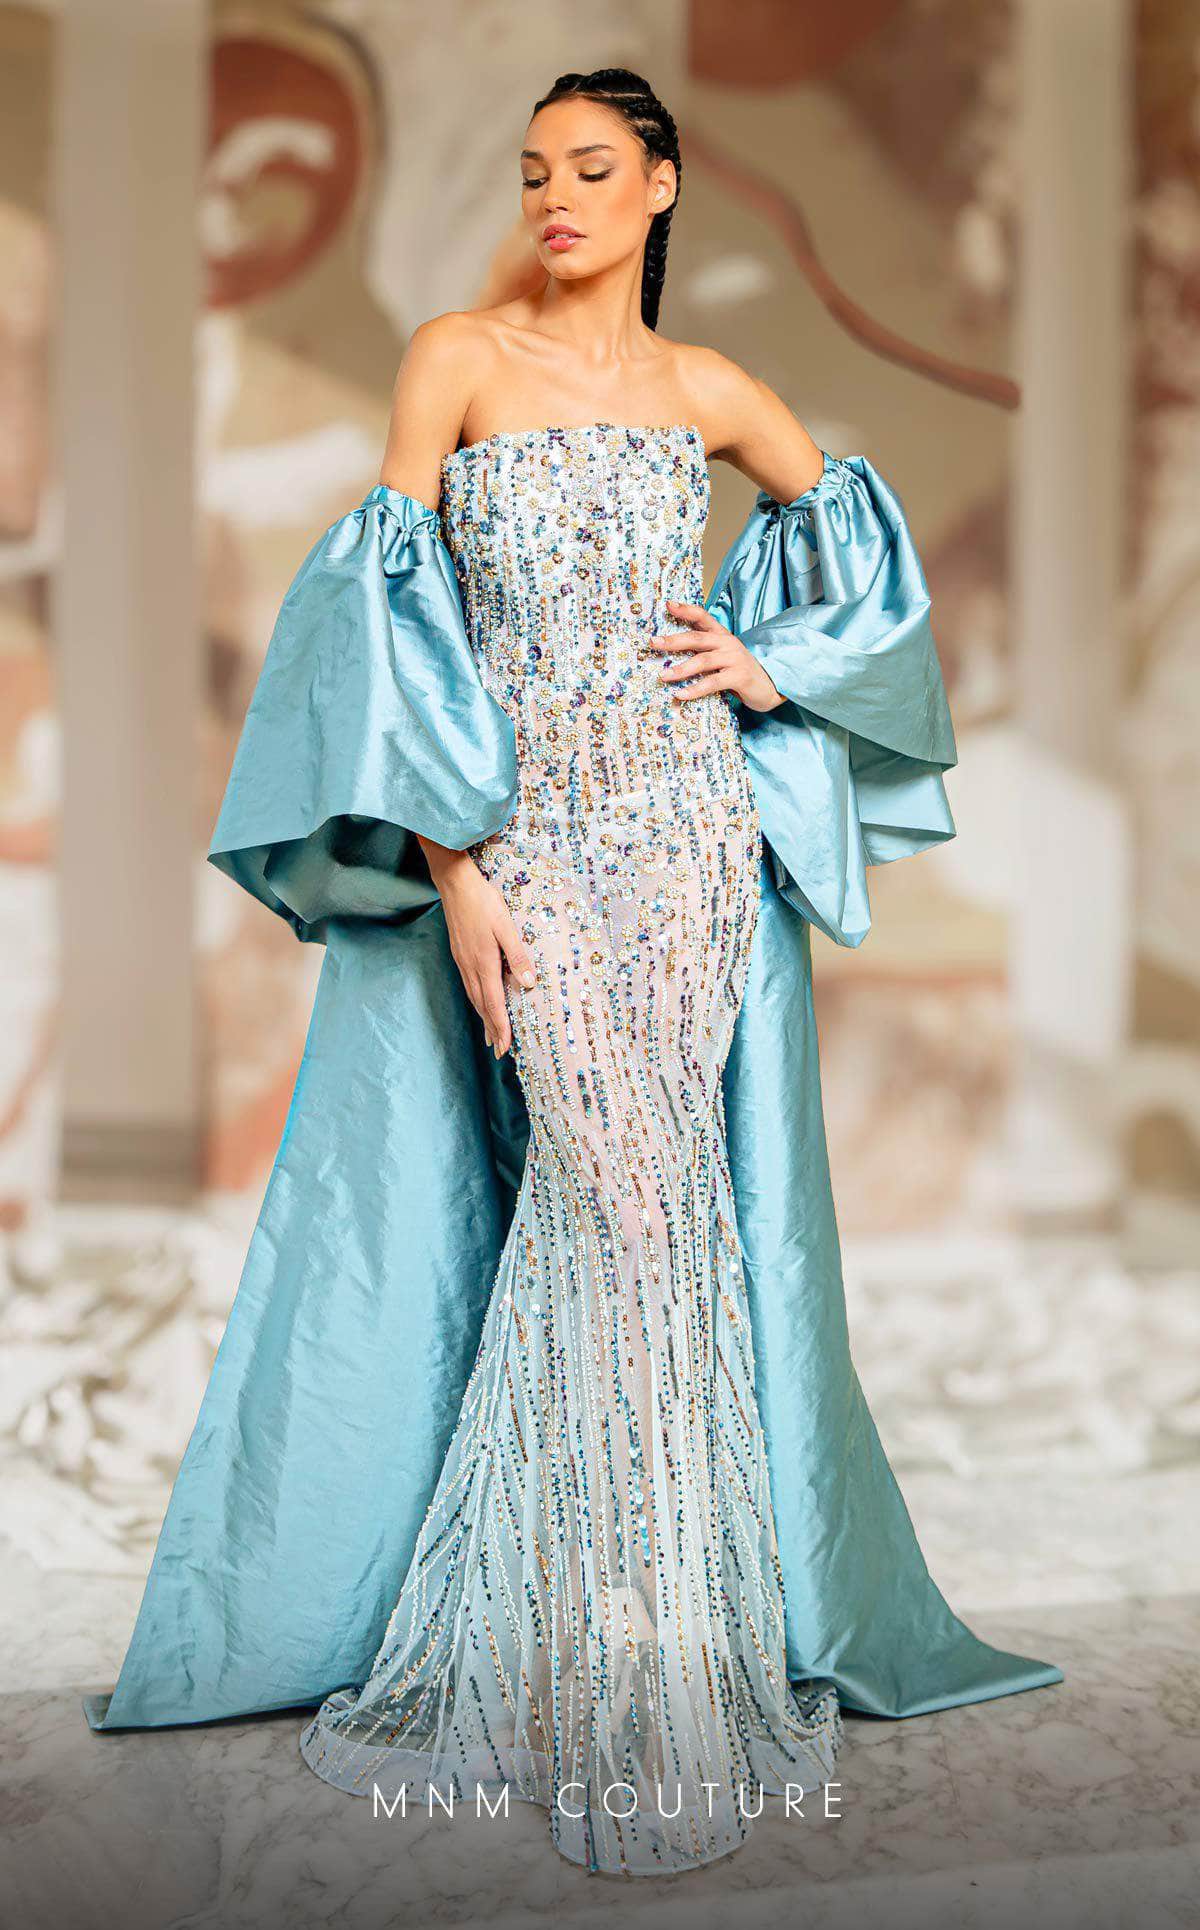 MNM Couture K4174 - Sequin Mermaid Evening Gown
